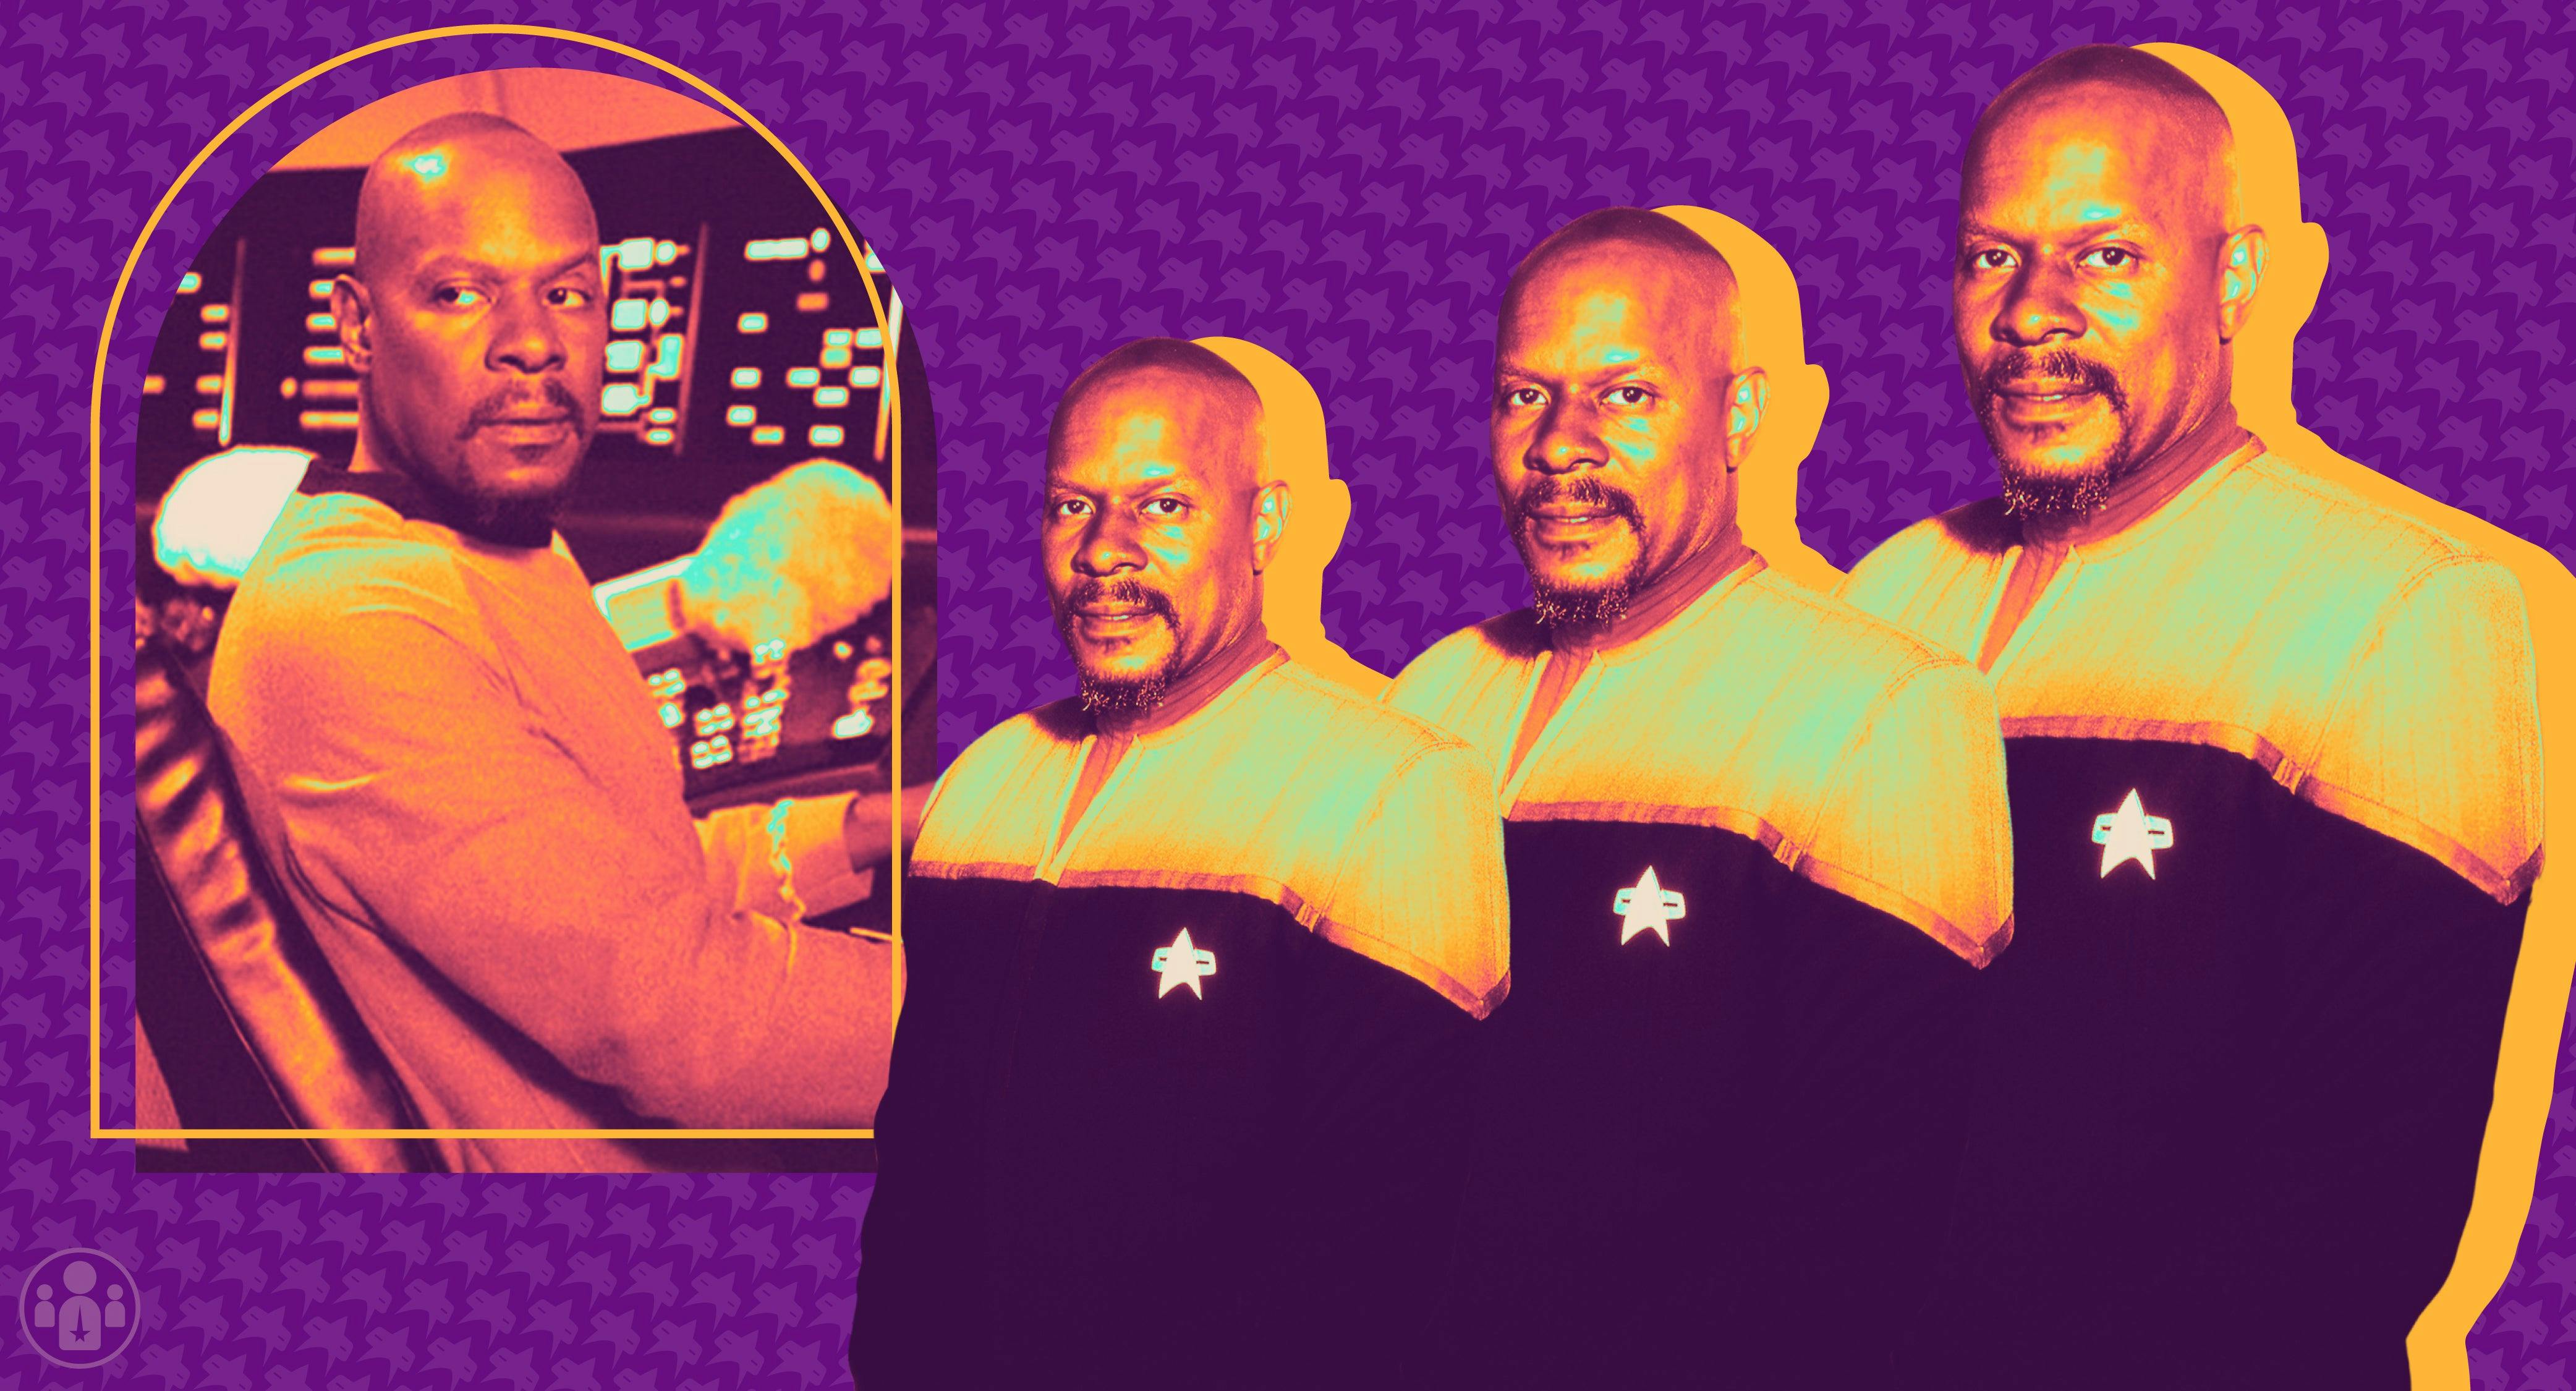 Captain Benjamin Sisko, with an orange filter over the image, stands against a purple background.